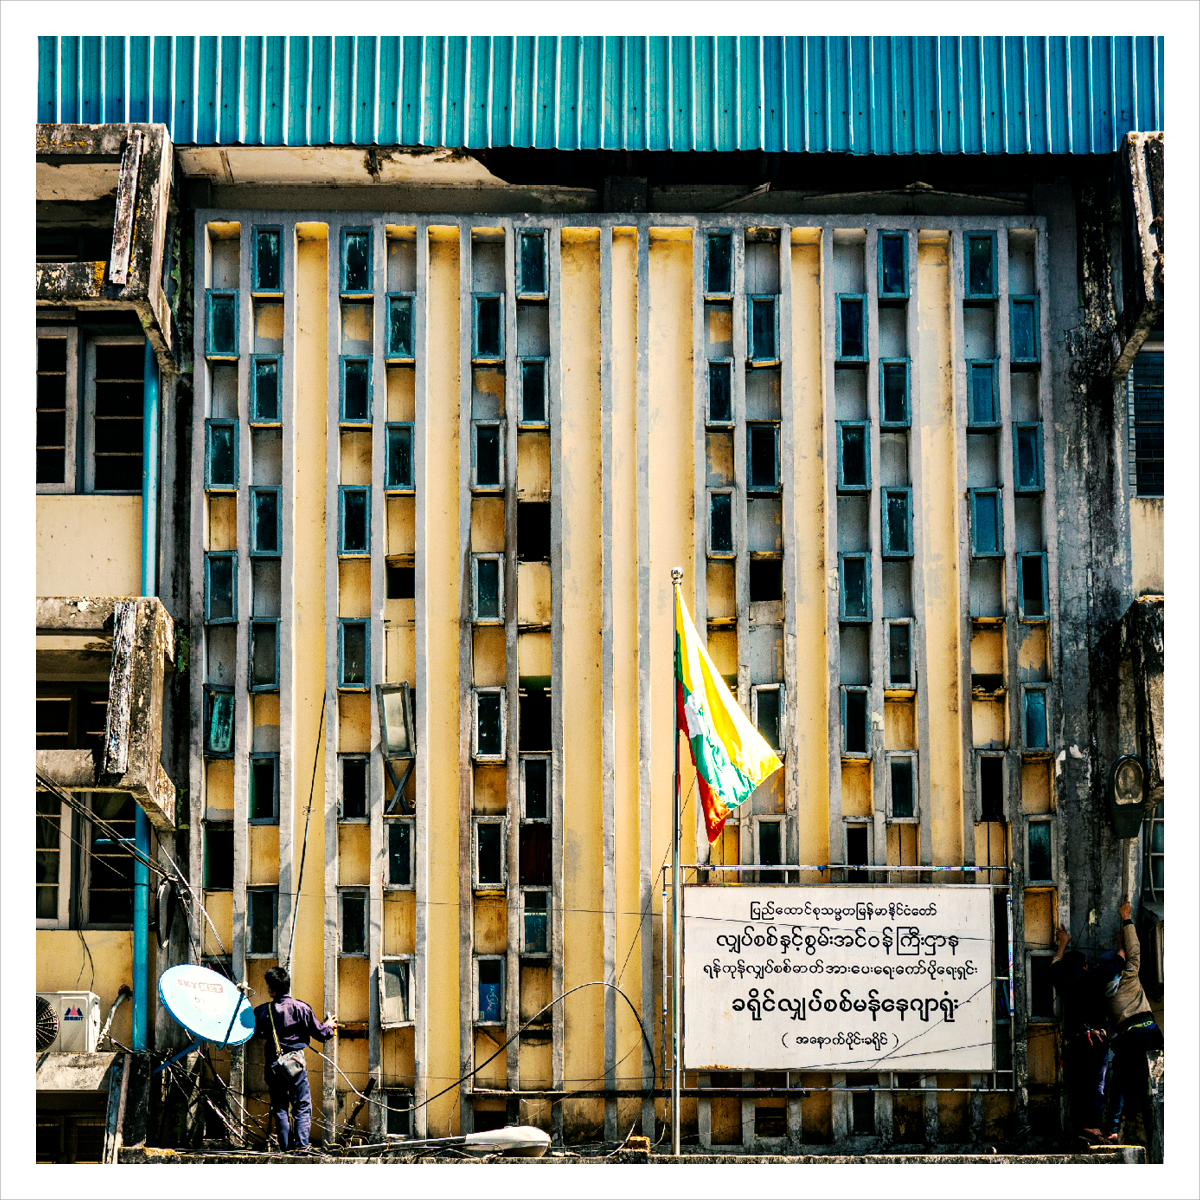 photography of streetlife, holy places and architecture in thailand and burma